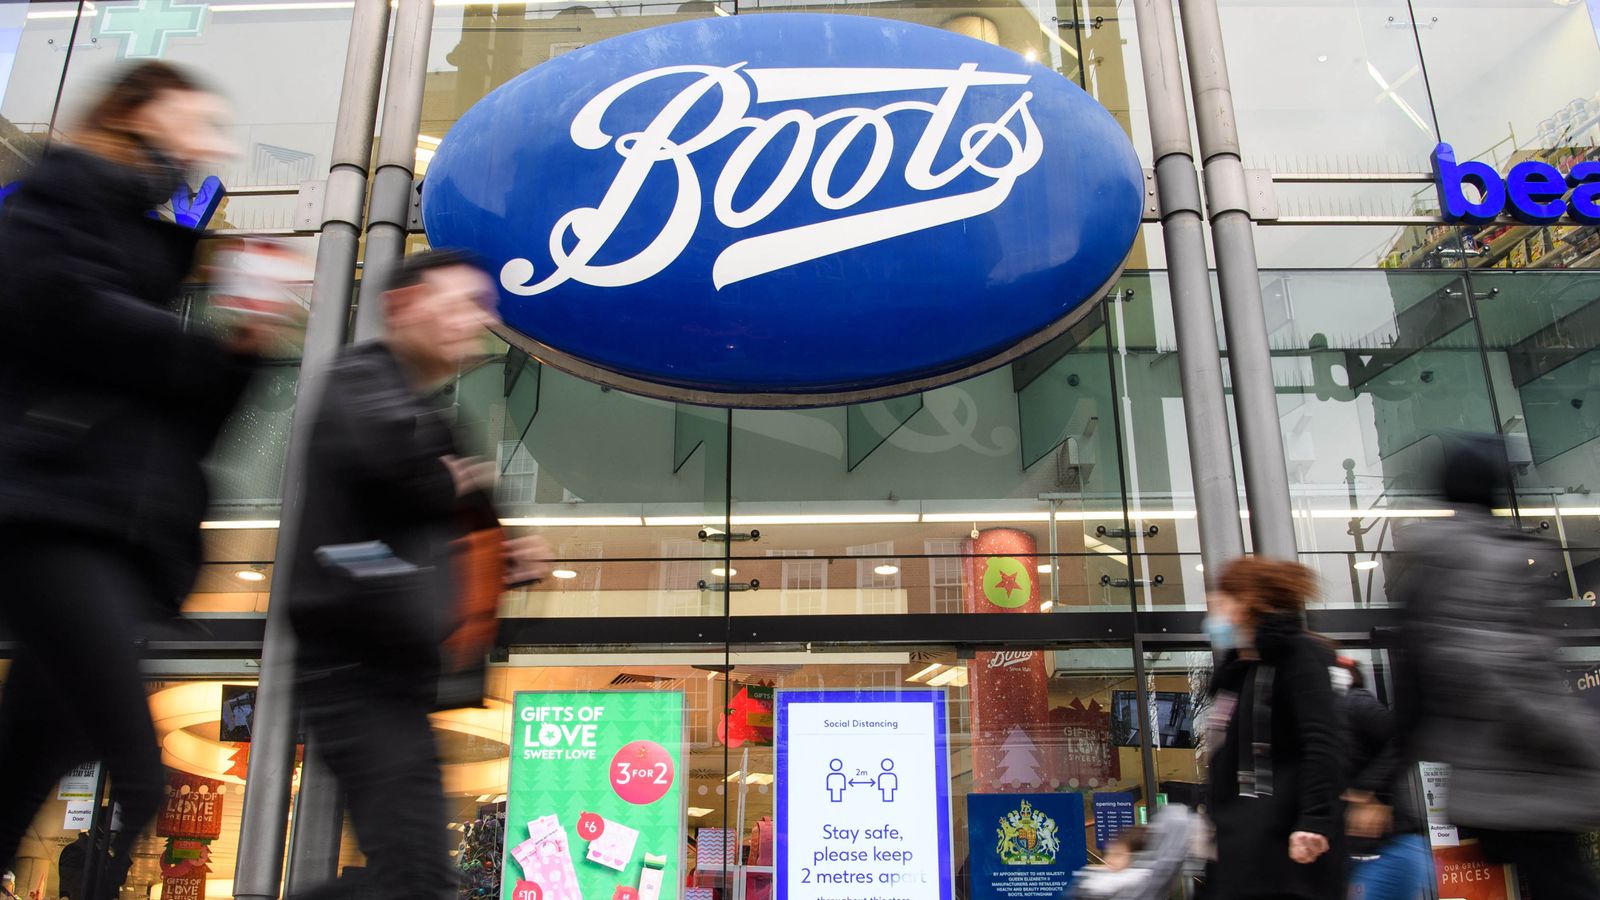 Boots owner to explore sale of UK’s biggest high street chemist chain